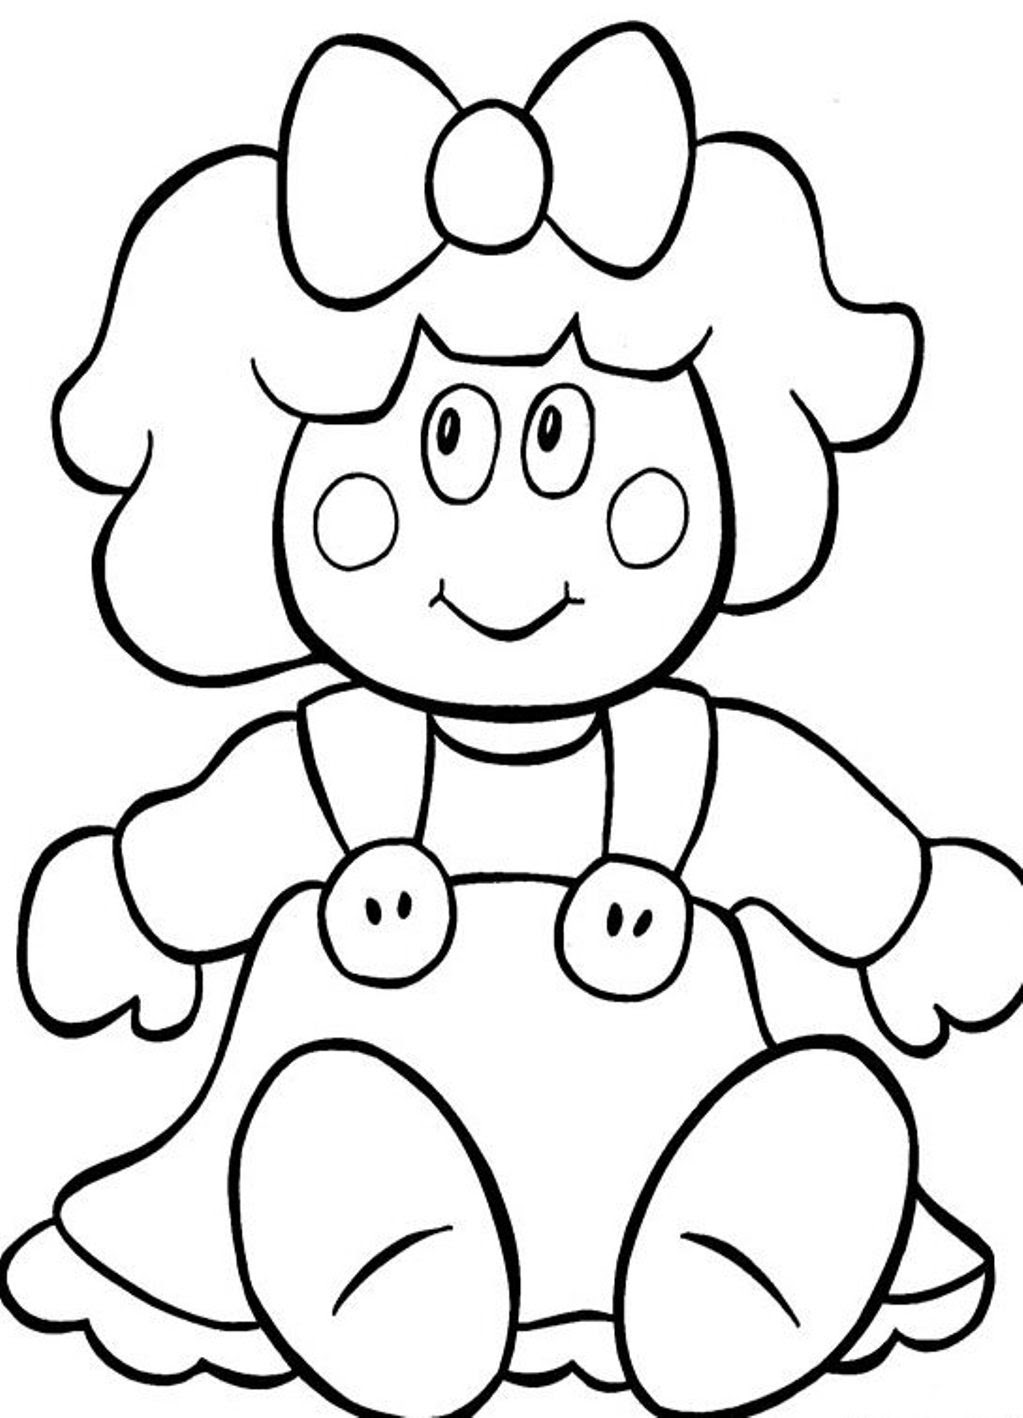 Download Doll coloring pages to download and print for free